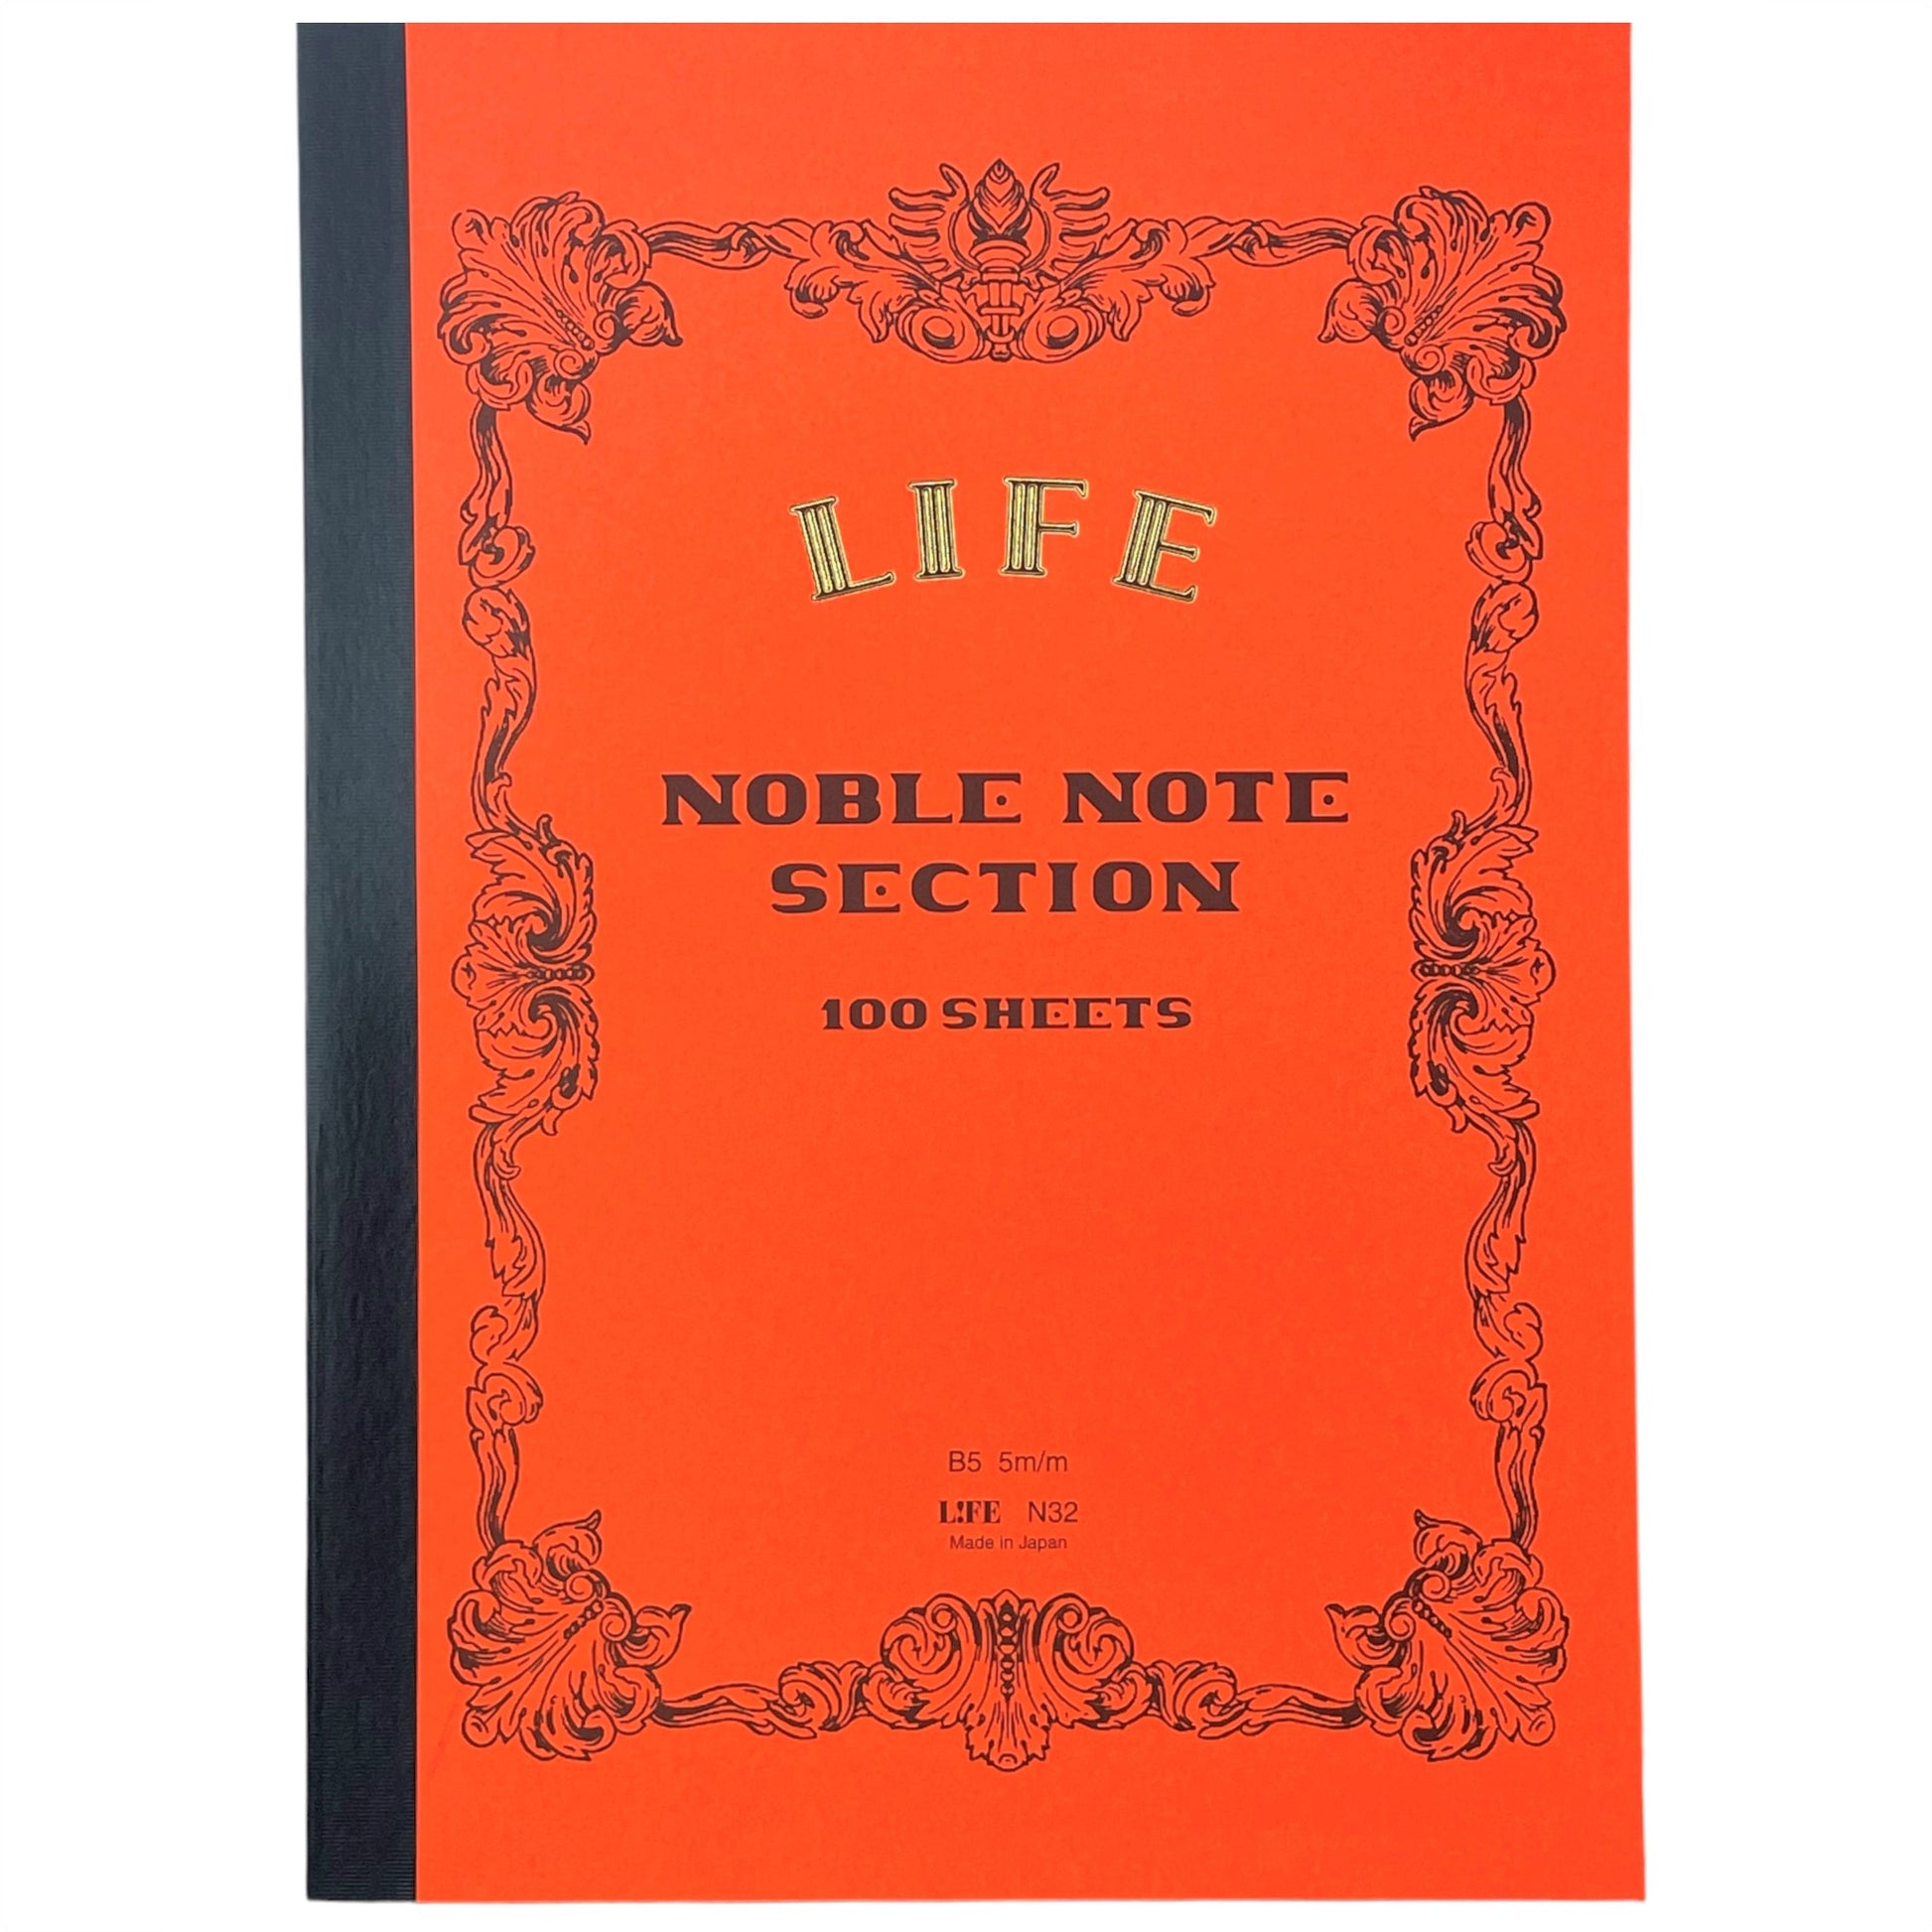 Softcover notebook with grid pages. The cover is plain red with a decorative black border and branding.  Life Noble range by Japanese brand Life